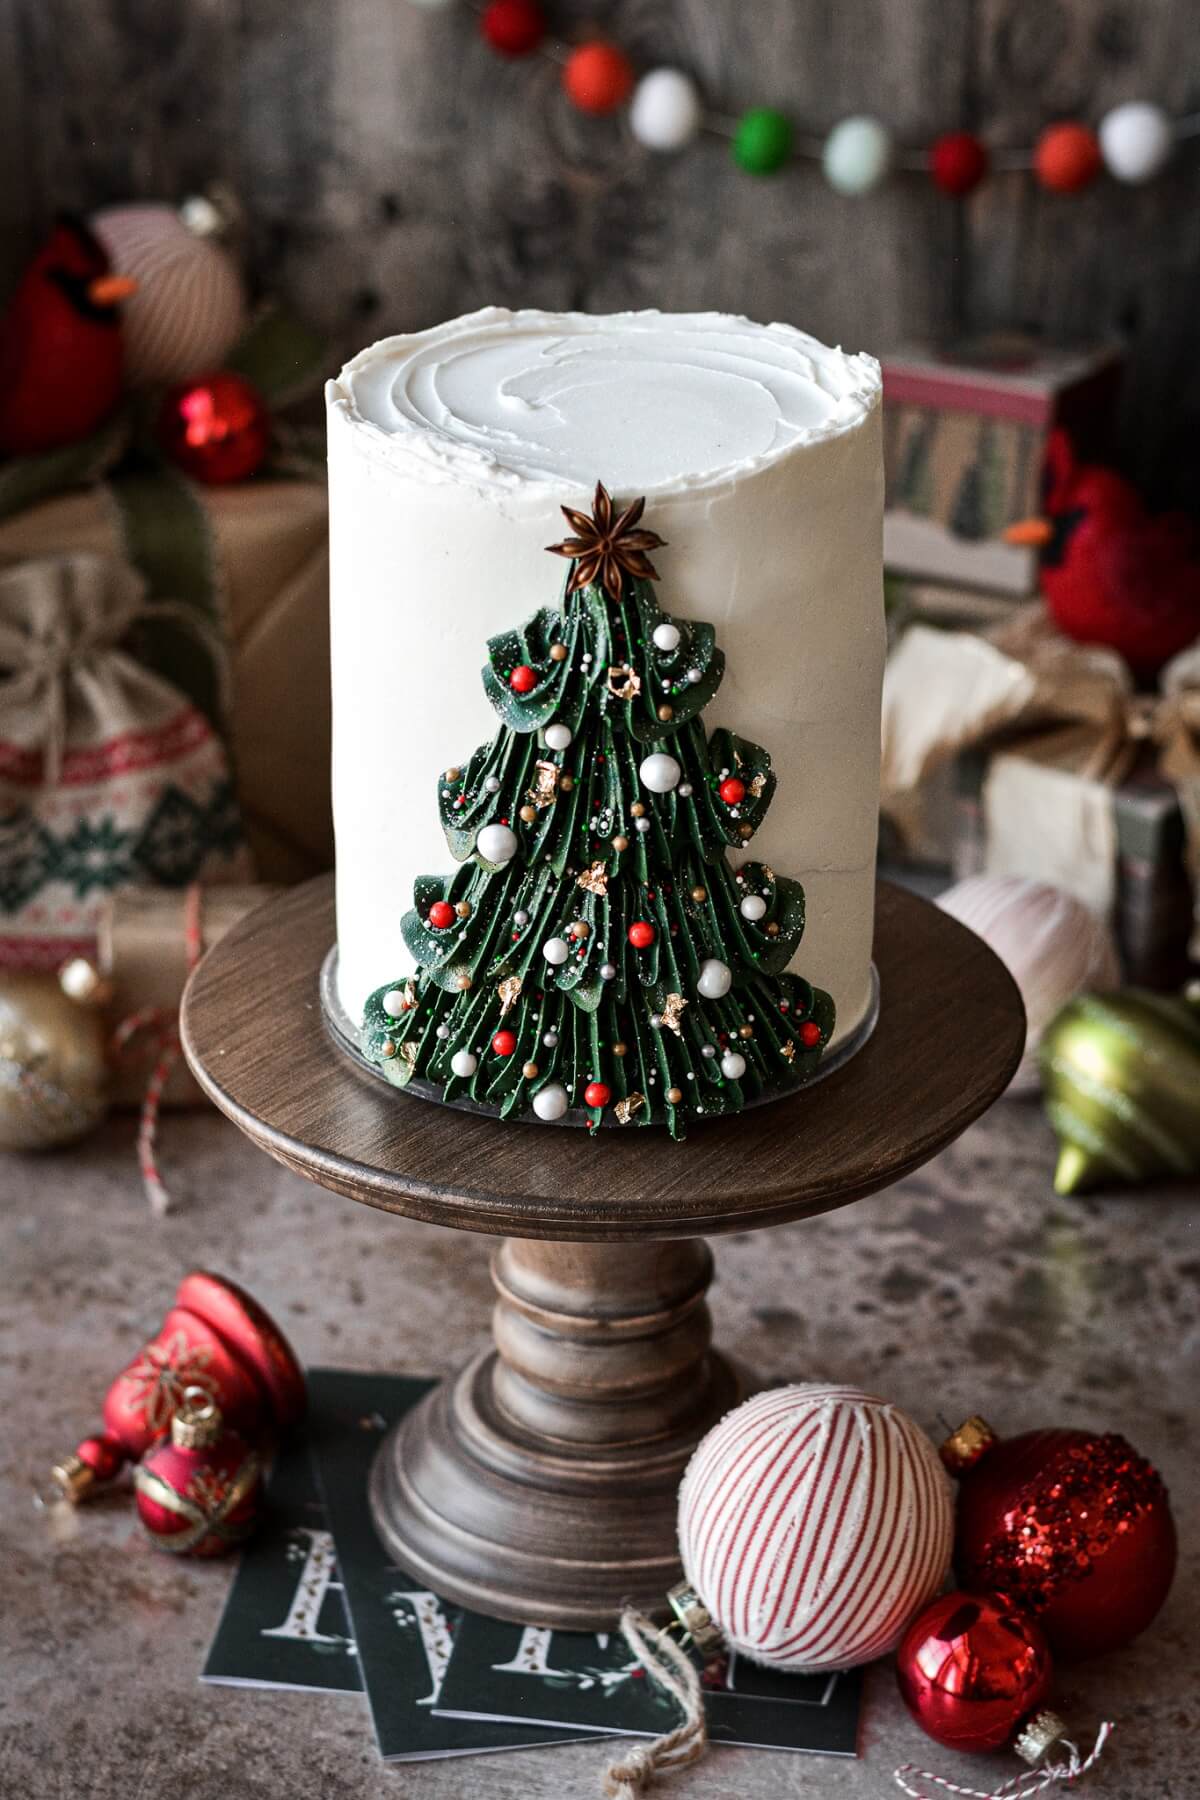 Buttercream Christmas tree cake on a wooden cake stand.